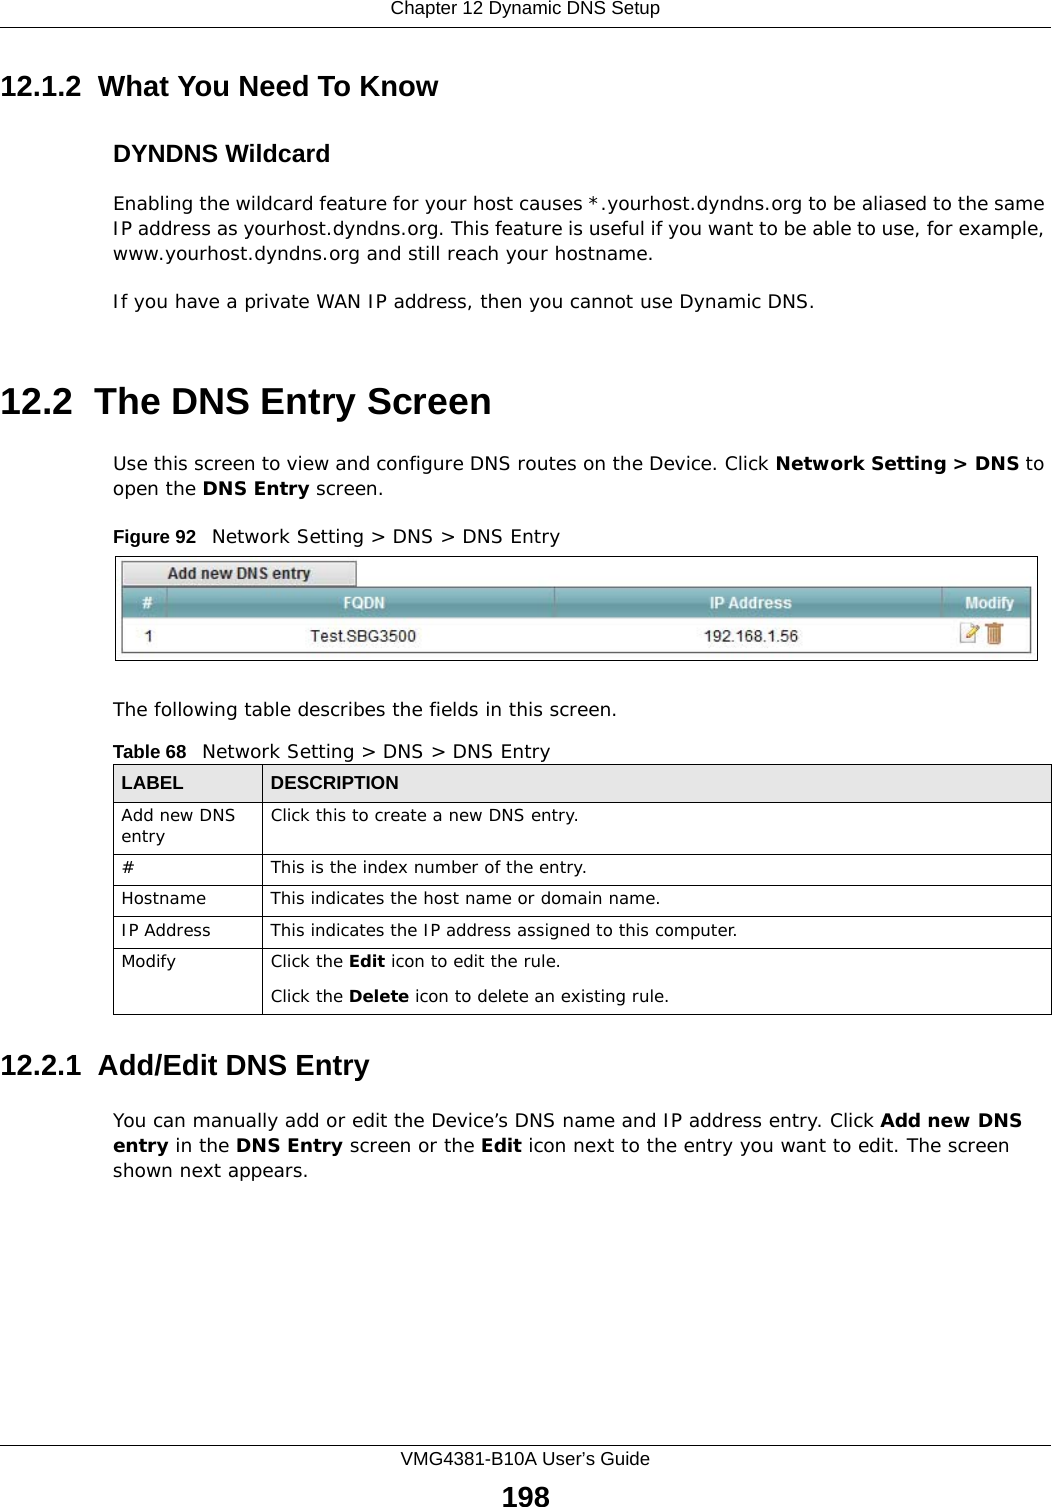 Chapter 12 Dynamic DNS SetupVMG4381-B10A User’s Guide19812.1.2  What You Need To KnowDYNDNS WildcardEnabling the wildcard feature for your host causes *.yourhost.dyndns.org to be aliased to the same IP address as yourhost.dyndns.org. This feature is useful if you want to be able to use, for example, www.yourhost.dyndns.org and still reach your hostname.If you have a private WAN IP address, then you cannot use Dynamic DNS.12.2  The DNS Entry ScreenUse this screen to view and configure DNS routes on the Device. Click Network Setting &gt; DNS to open the DNS Entry screen.Figure 92   Network Setting &gt; DNS &gt; DNS EntryThe following table describes the fields in this screen. 12.2.1  Add/Edit DNS EntryYou can manually add or edit the Device’s DNS name and IP address entry. Click Add new DNS entry in the DNS Entry screen or the Edit icon next to the entry you want to edit. The screen shown next appears.Table 68   Network Setting &gt; DNS &gt; DNS EntryLABEL DESCRIPTIONAdd new DNS entry Click this to create a new DNS entry.#This is the index number of the entry.Hostname This indicates the host name or domain name.IP Address This indicates the IP address assigned to this computer.Modify Click the Edit icon to edit the rule.Click the Delete icon to delete an existing rule.